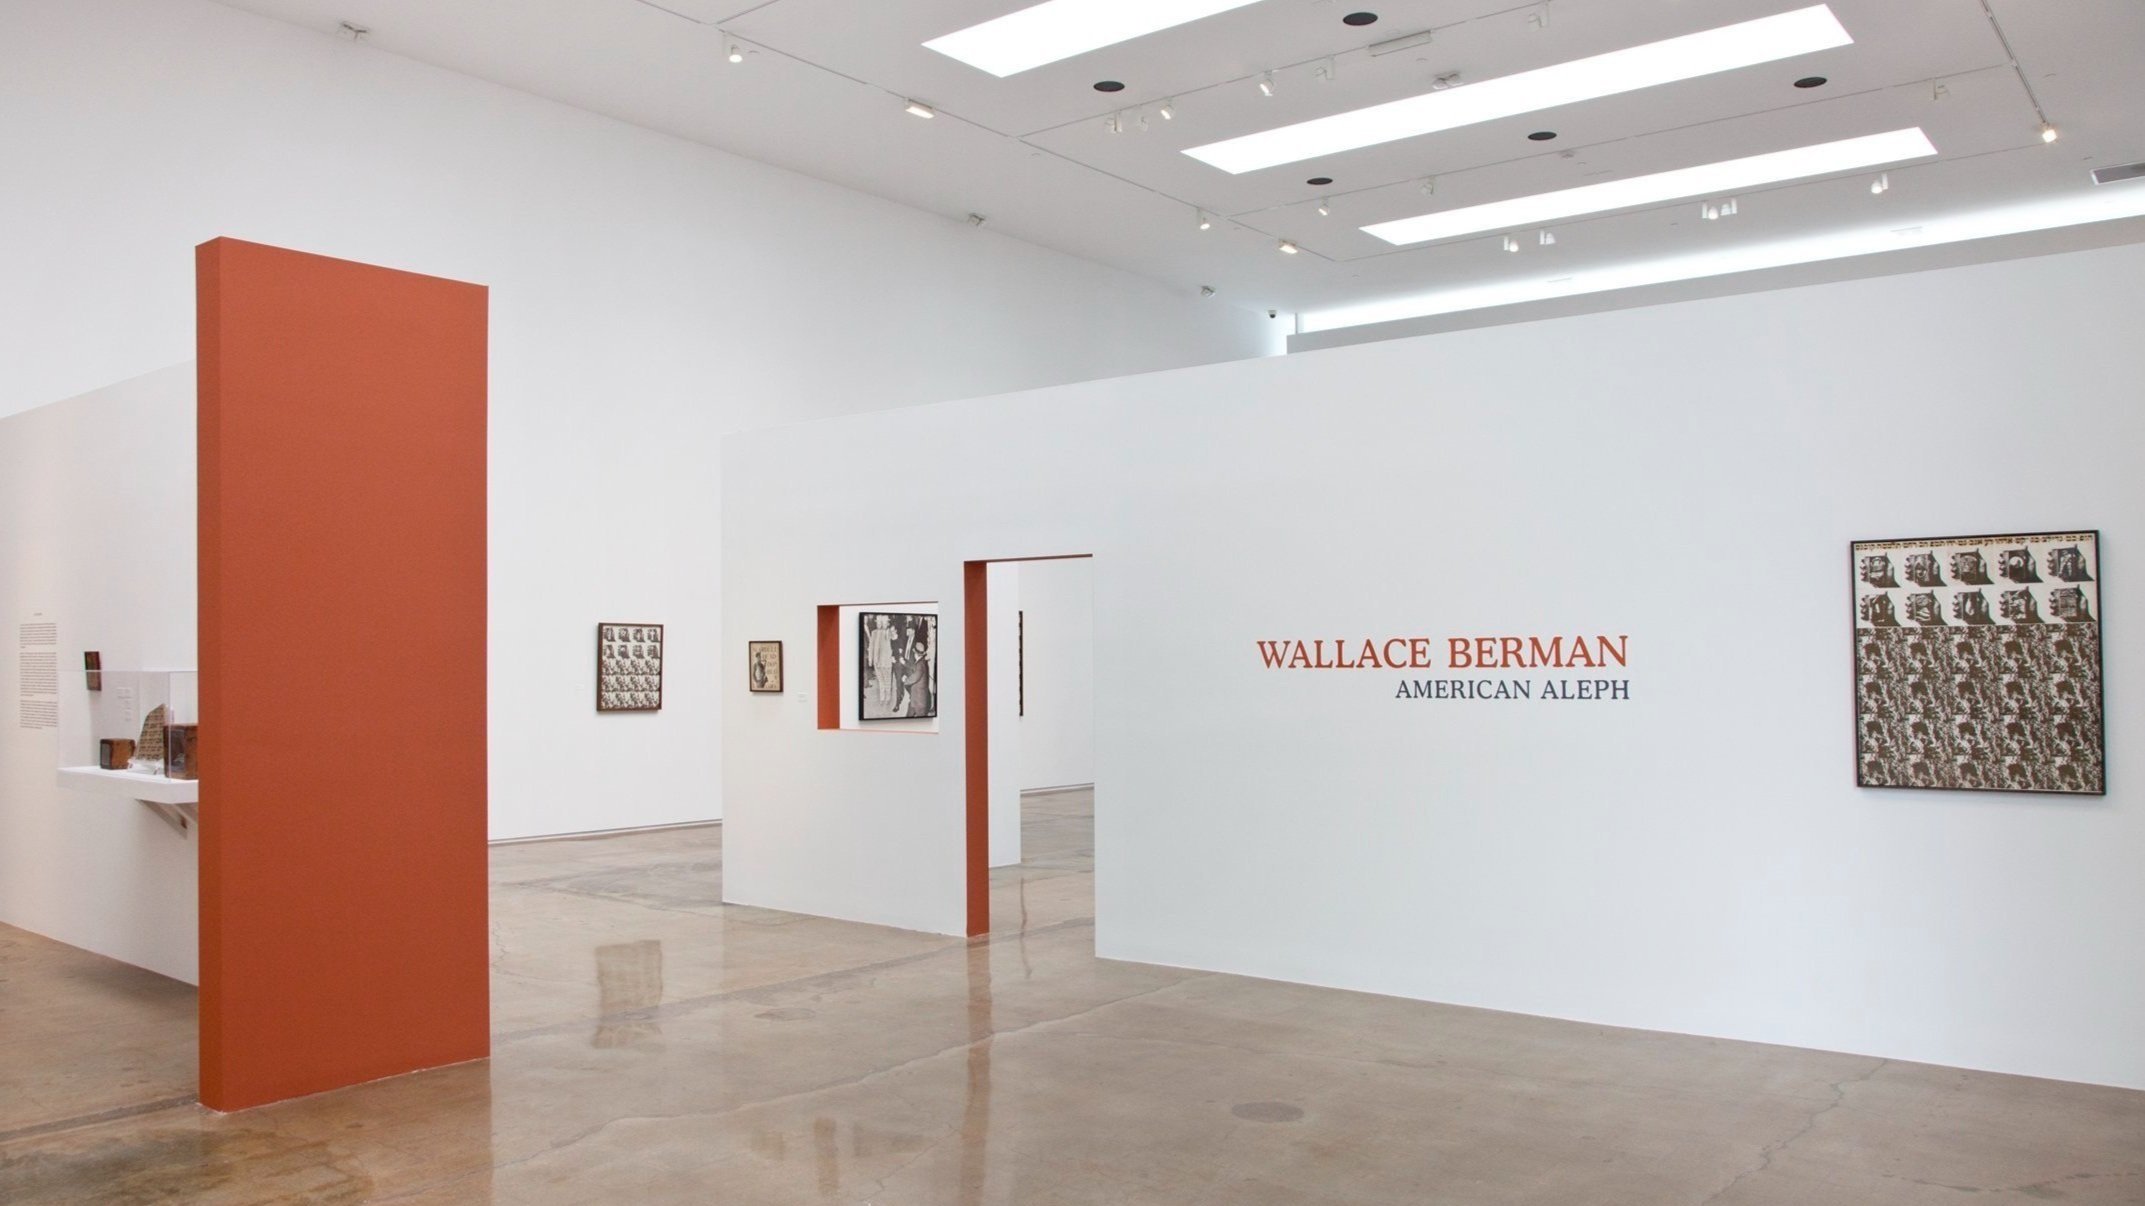 THE ESTATE OF WALLACE BERMAN